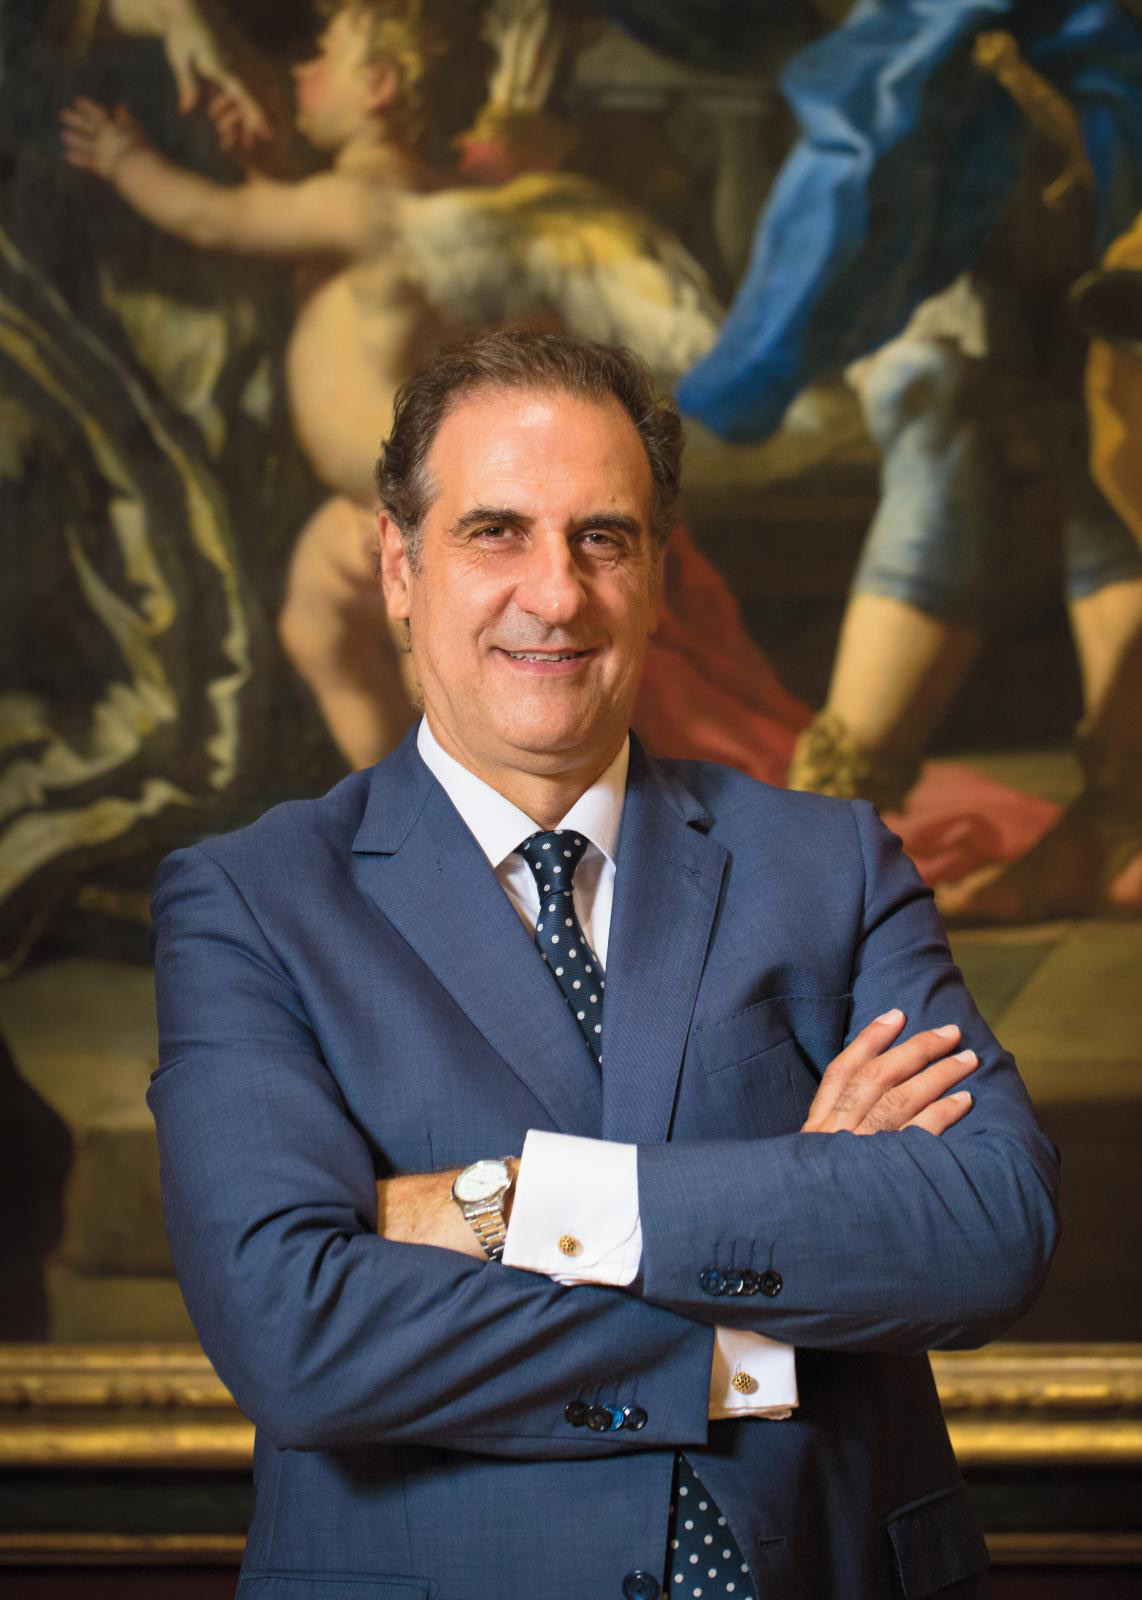 Gabriele Finaldi, Director of the National Gallery in London